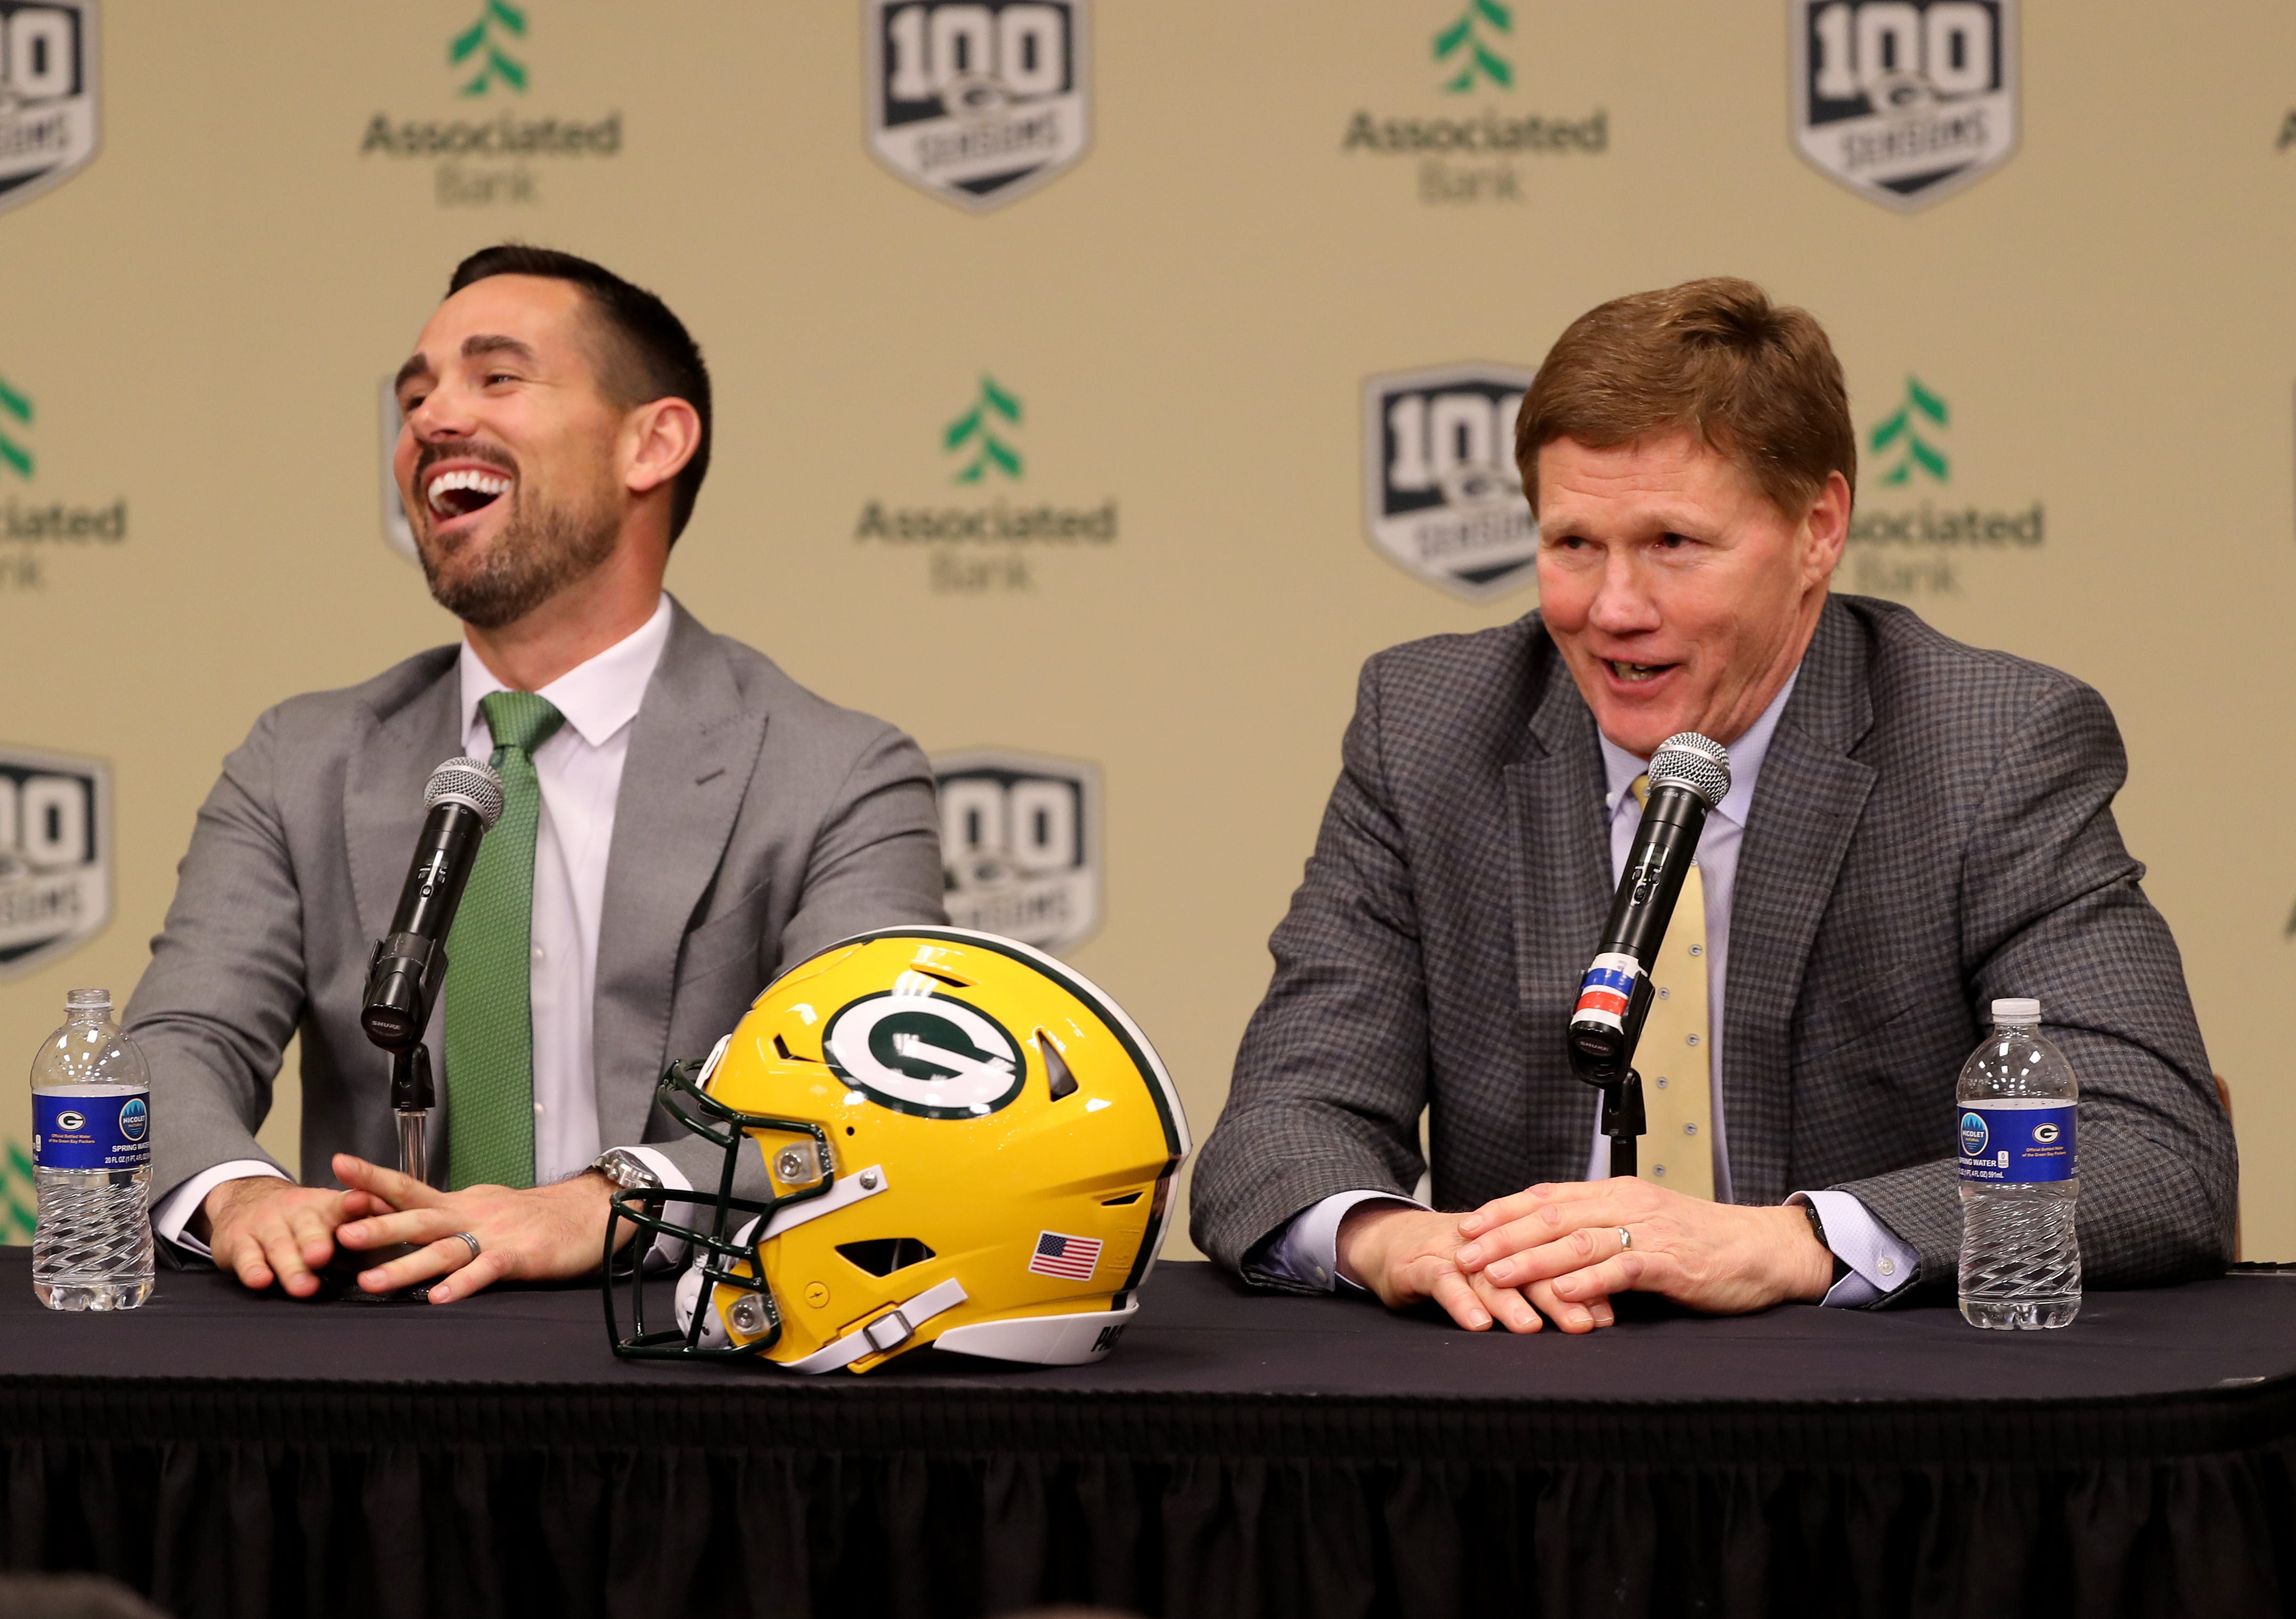 New Green Bay Packers head coach Matt LaFleur laughs as team president Mark Murphy, right, utters an expletive as LaFleur is introduced during a press conference in the Lambeau Field media auditorium Wednesday, January 9, 2019 in Green Bay, Wis.